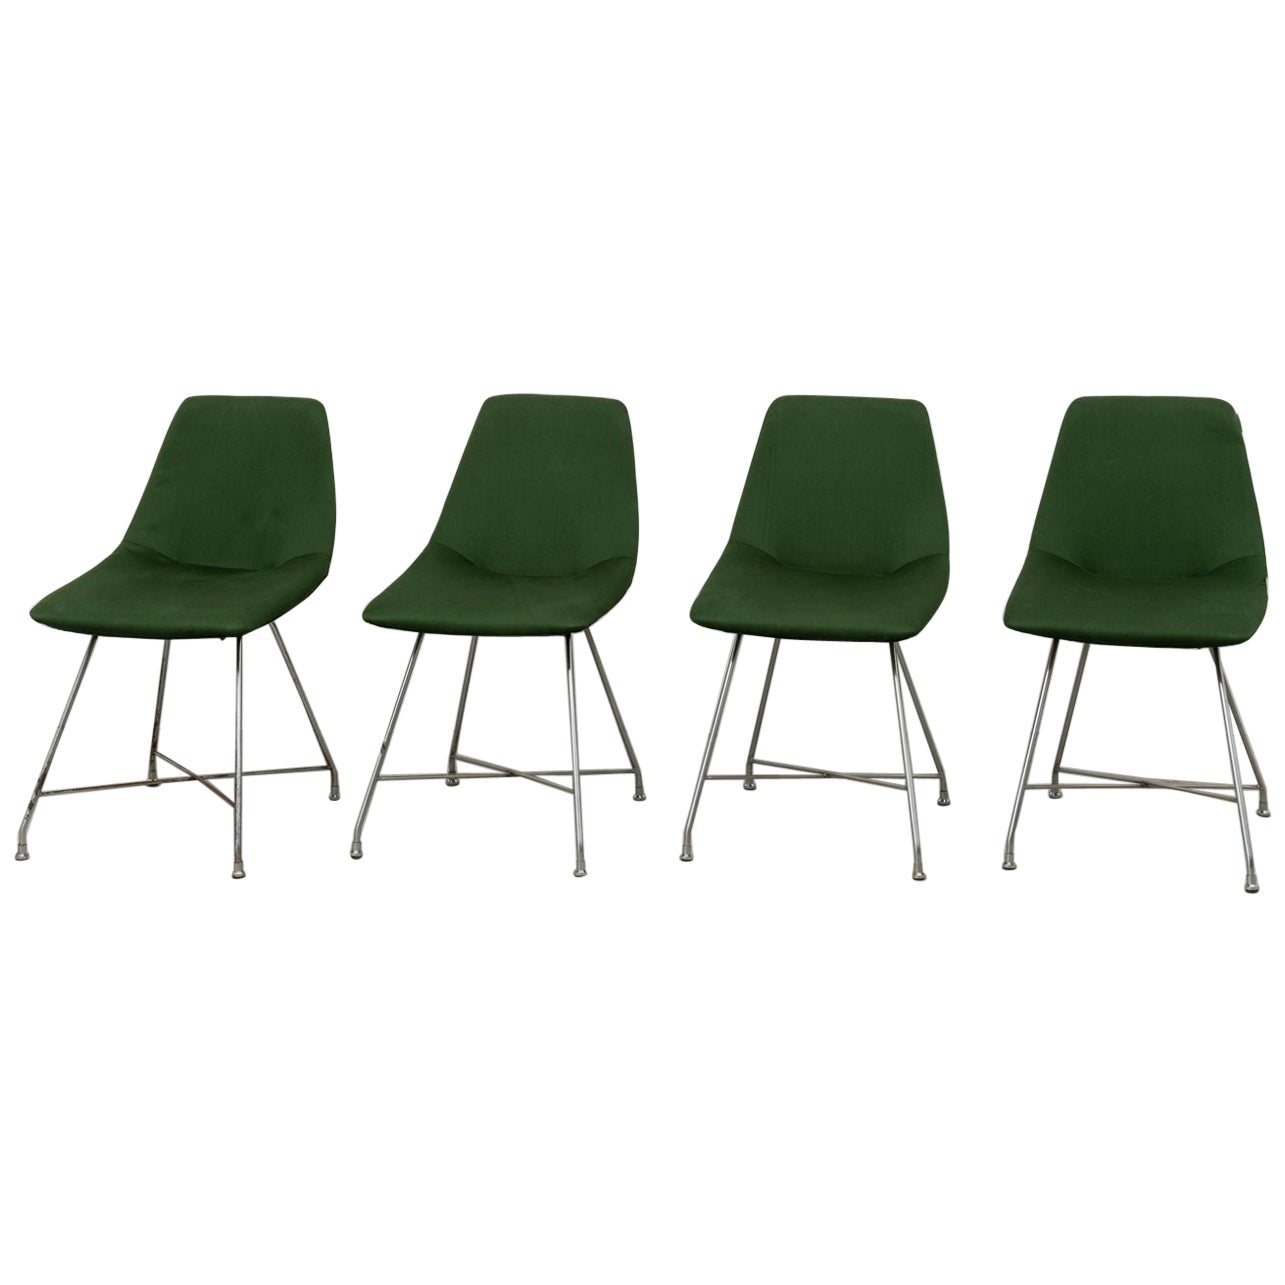 Augusto Bozzi Dining Room Chairs